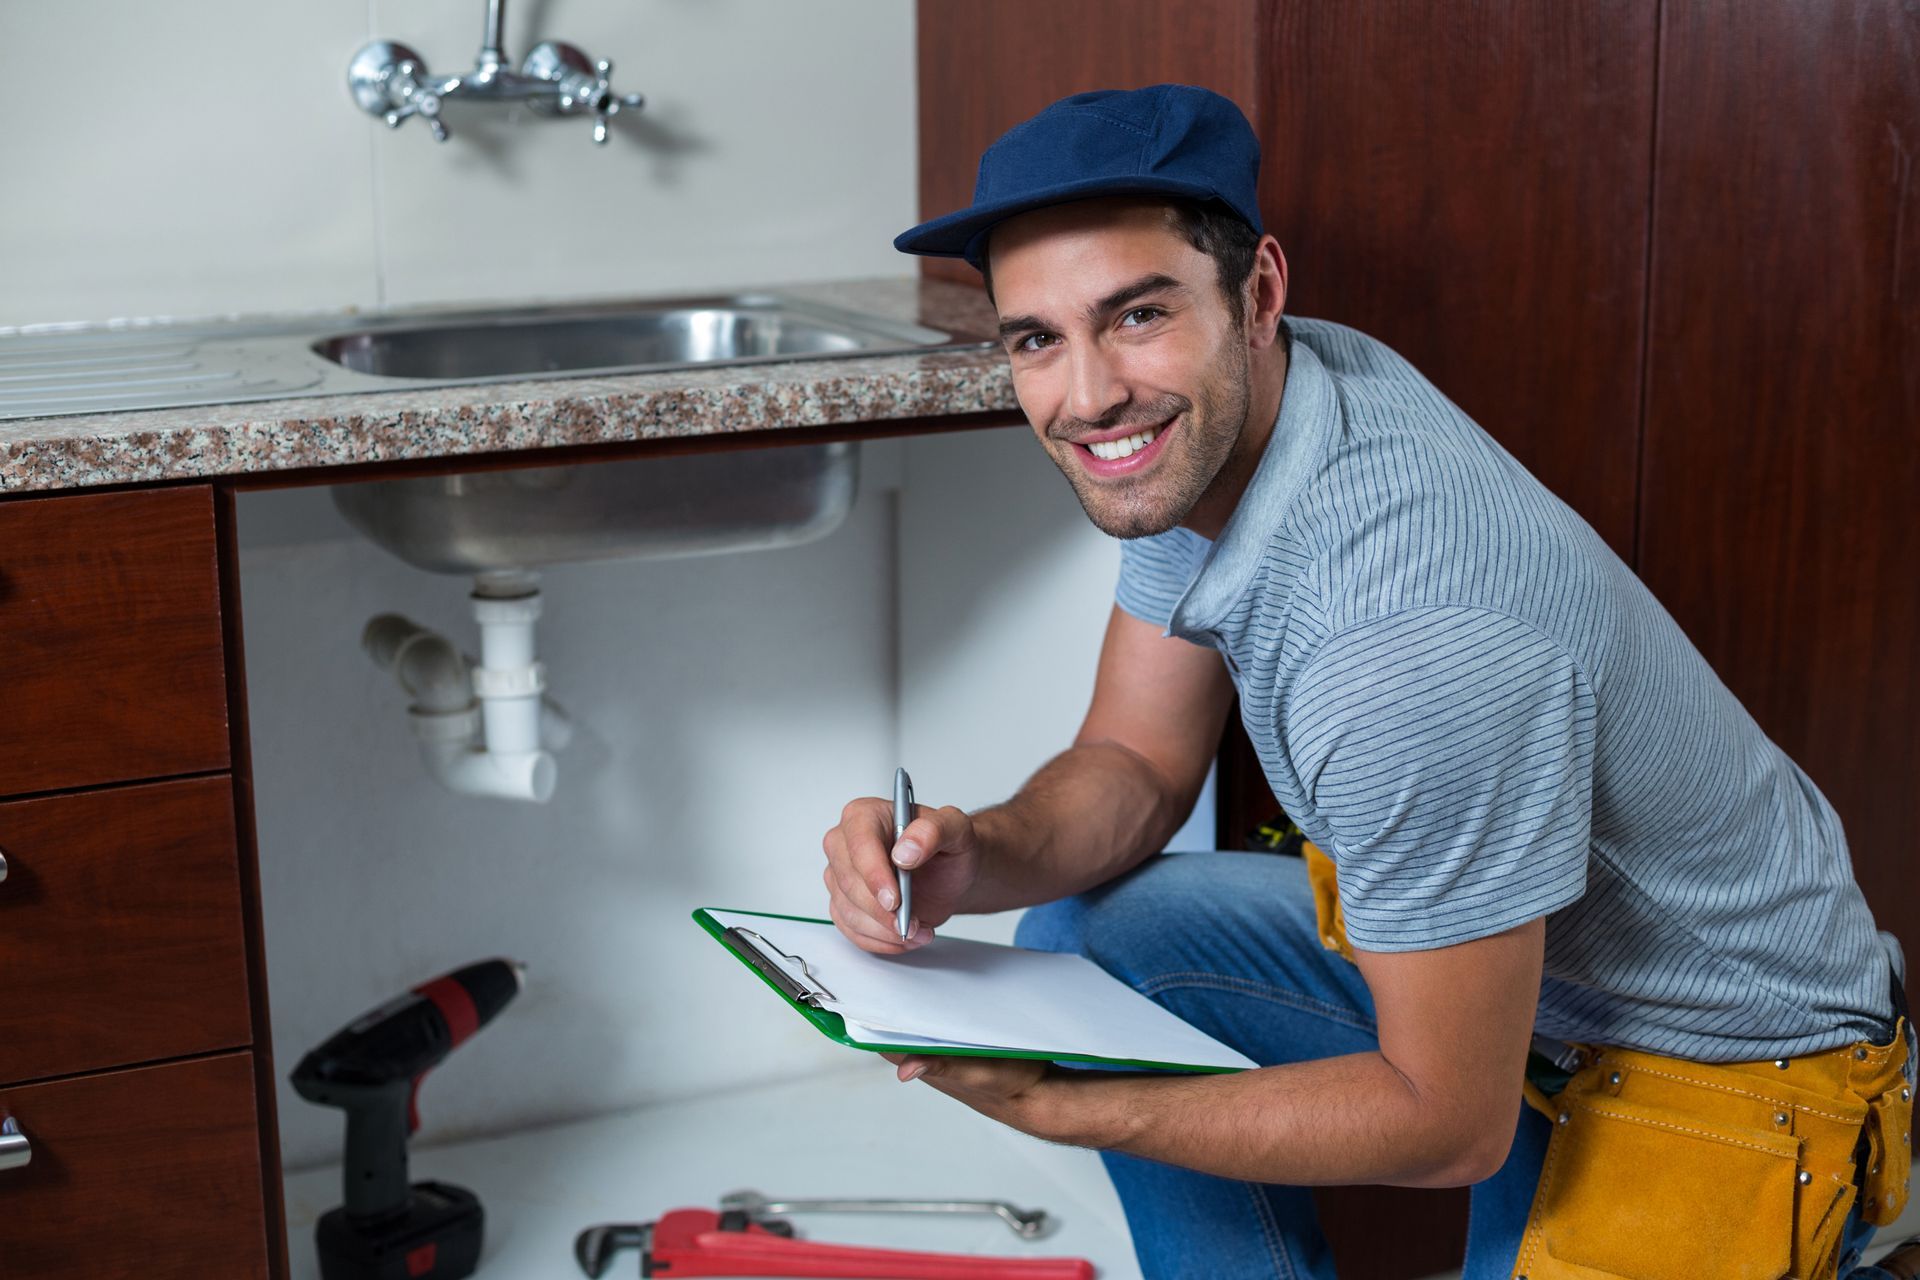 A plumber is writing on a clipboard under a sink in a kitchen.